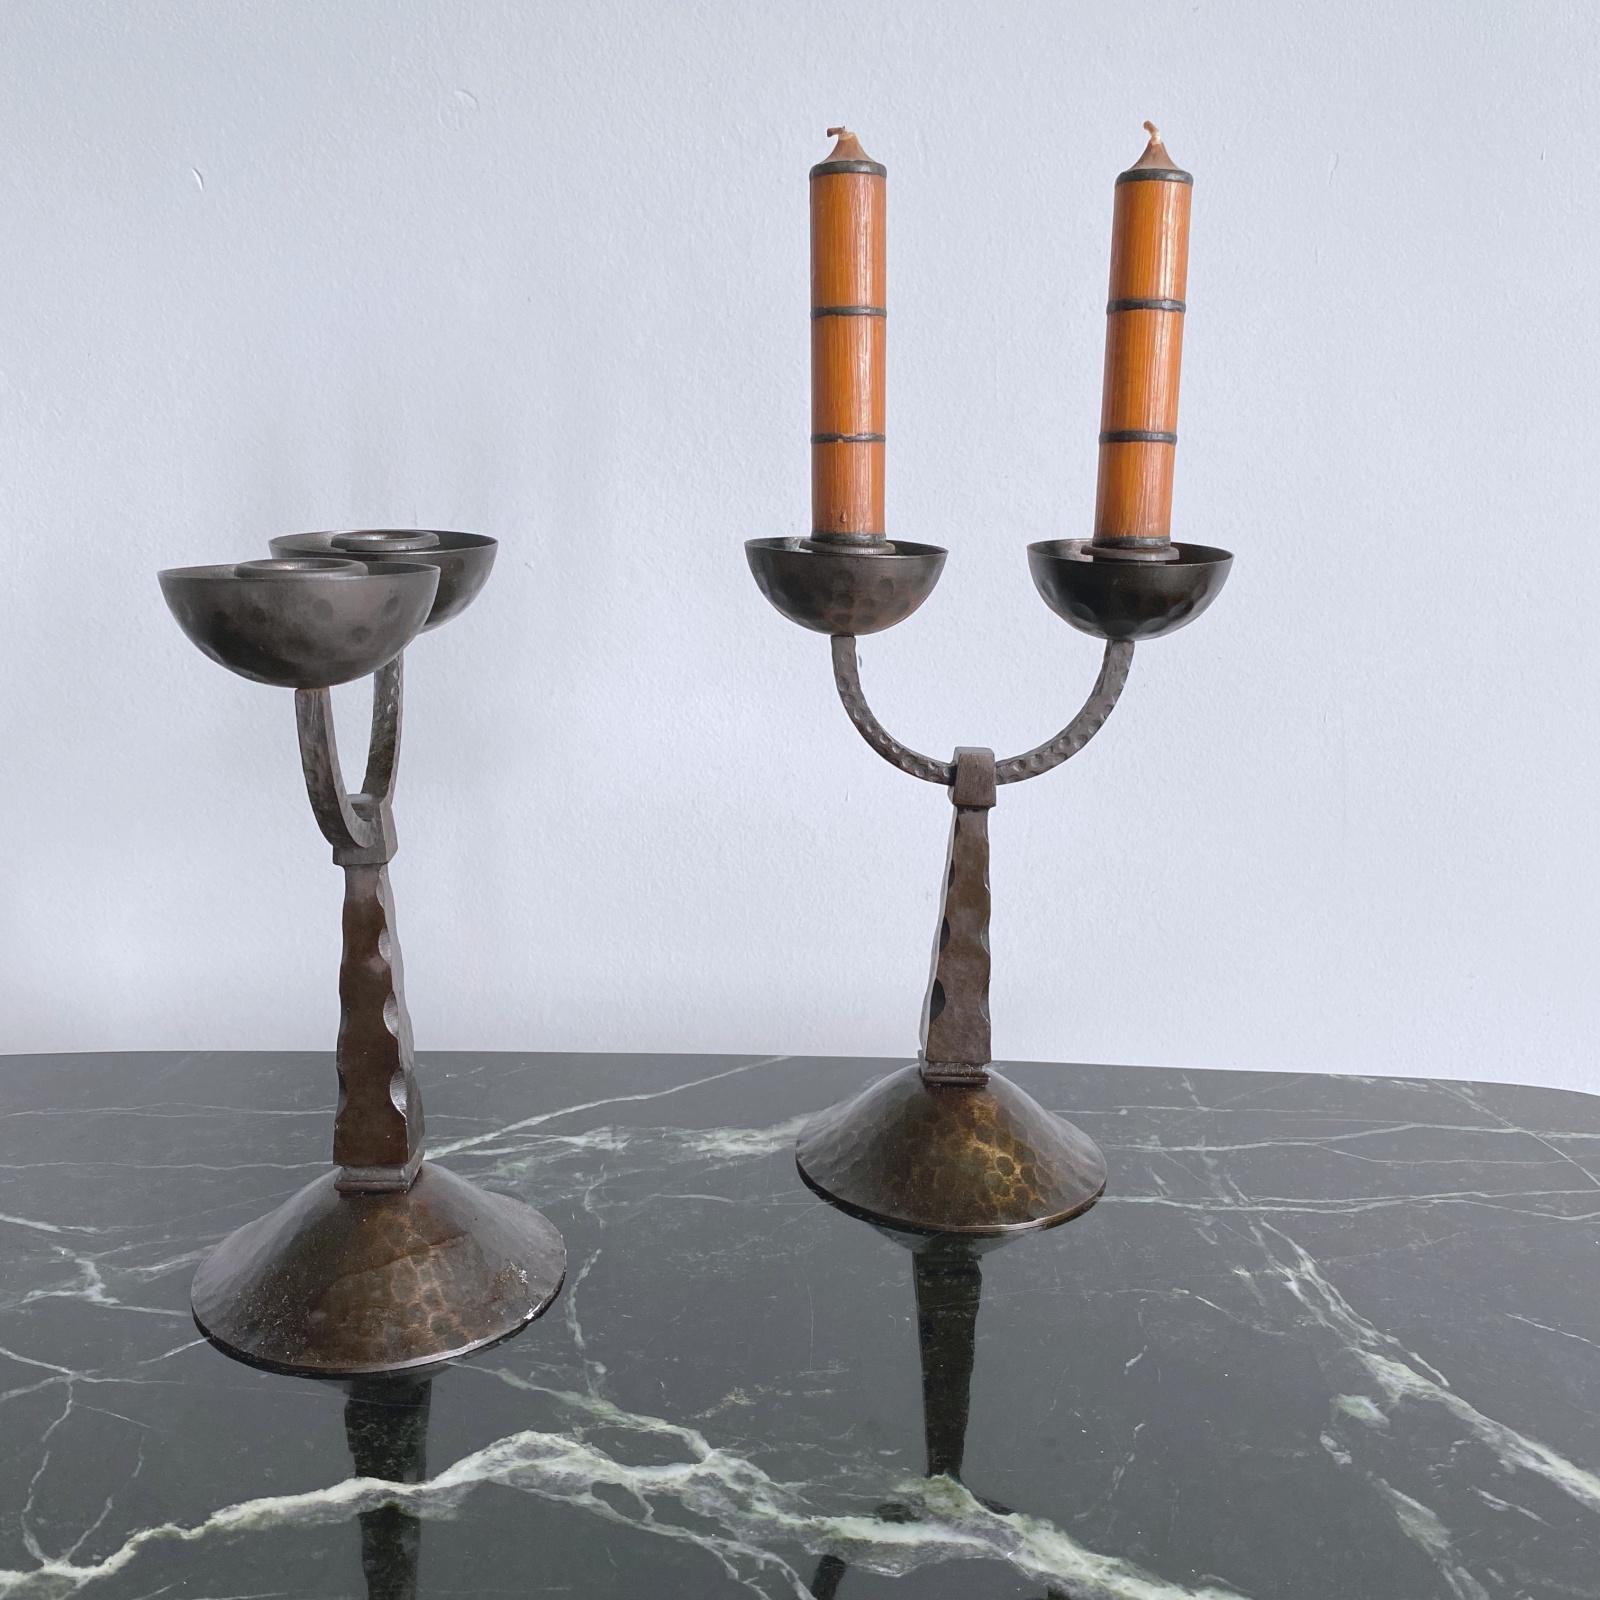 Beautiful midcentury candelabras with two arms each in Arts & Crafts style from 1950s, Austria. Will perfectly fit to rustical furniture by designers like Charlotte Perriand, Pierre Jeanneret, Jean Royère etc. Handmade of forged wrought iron. Very